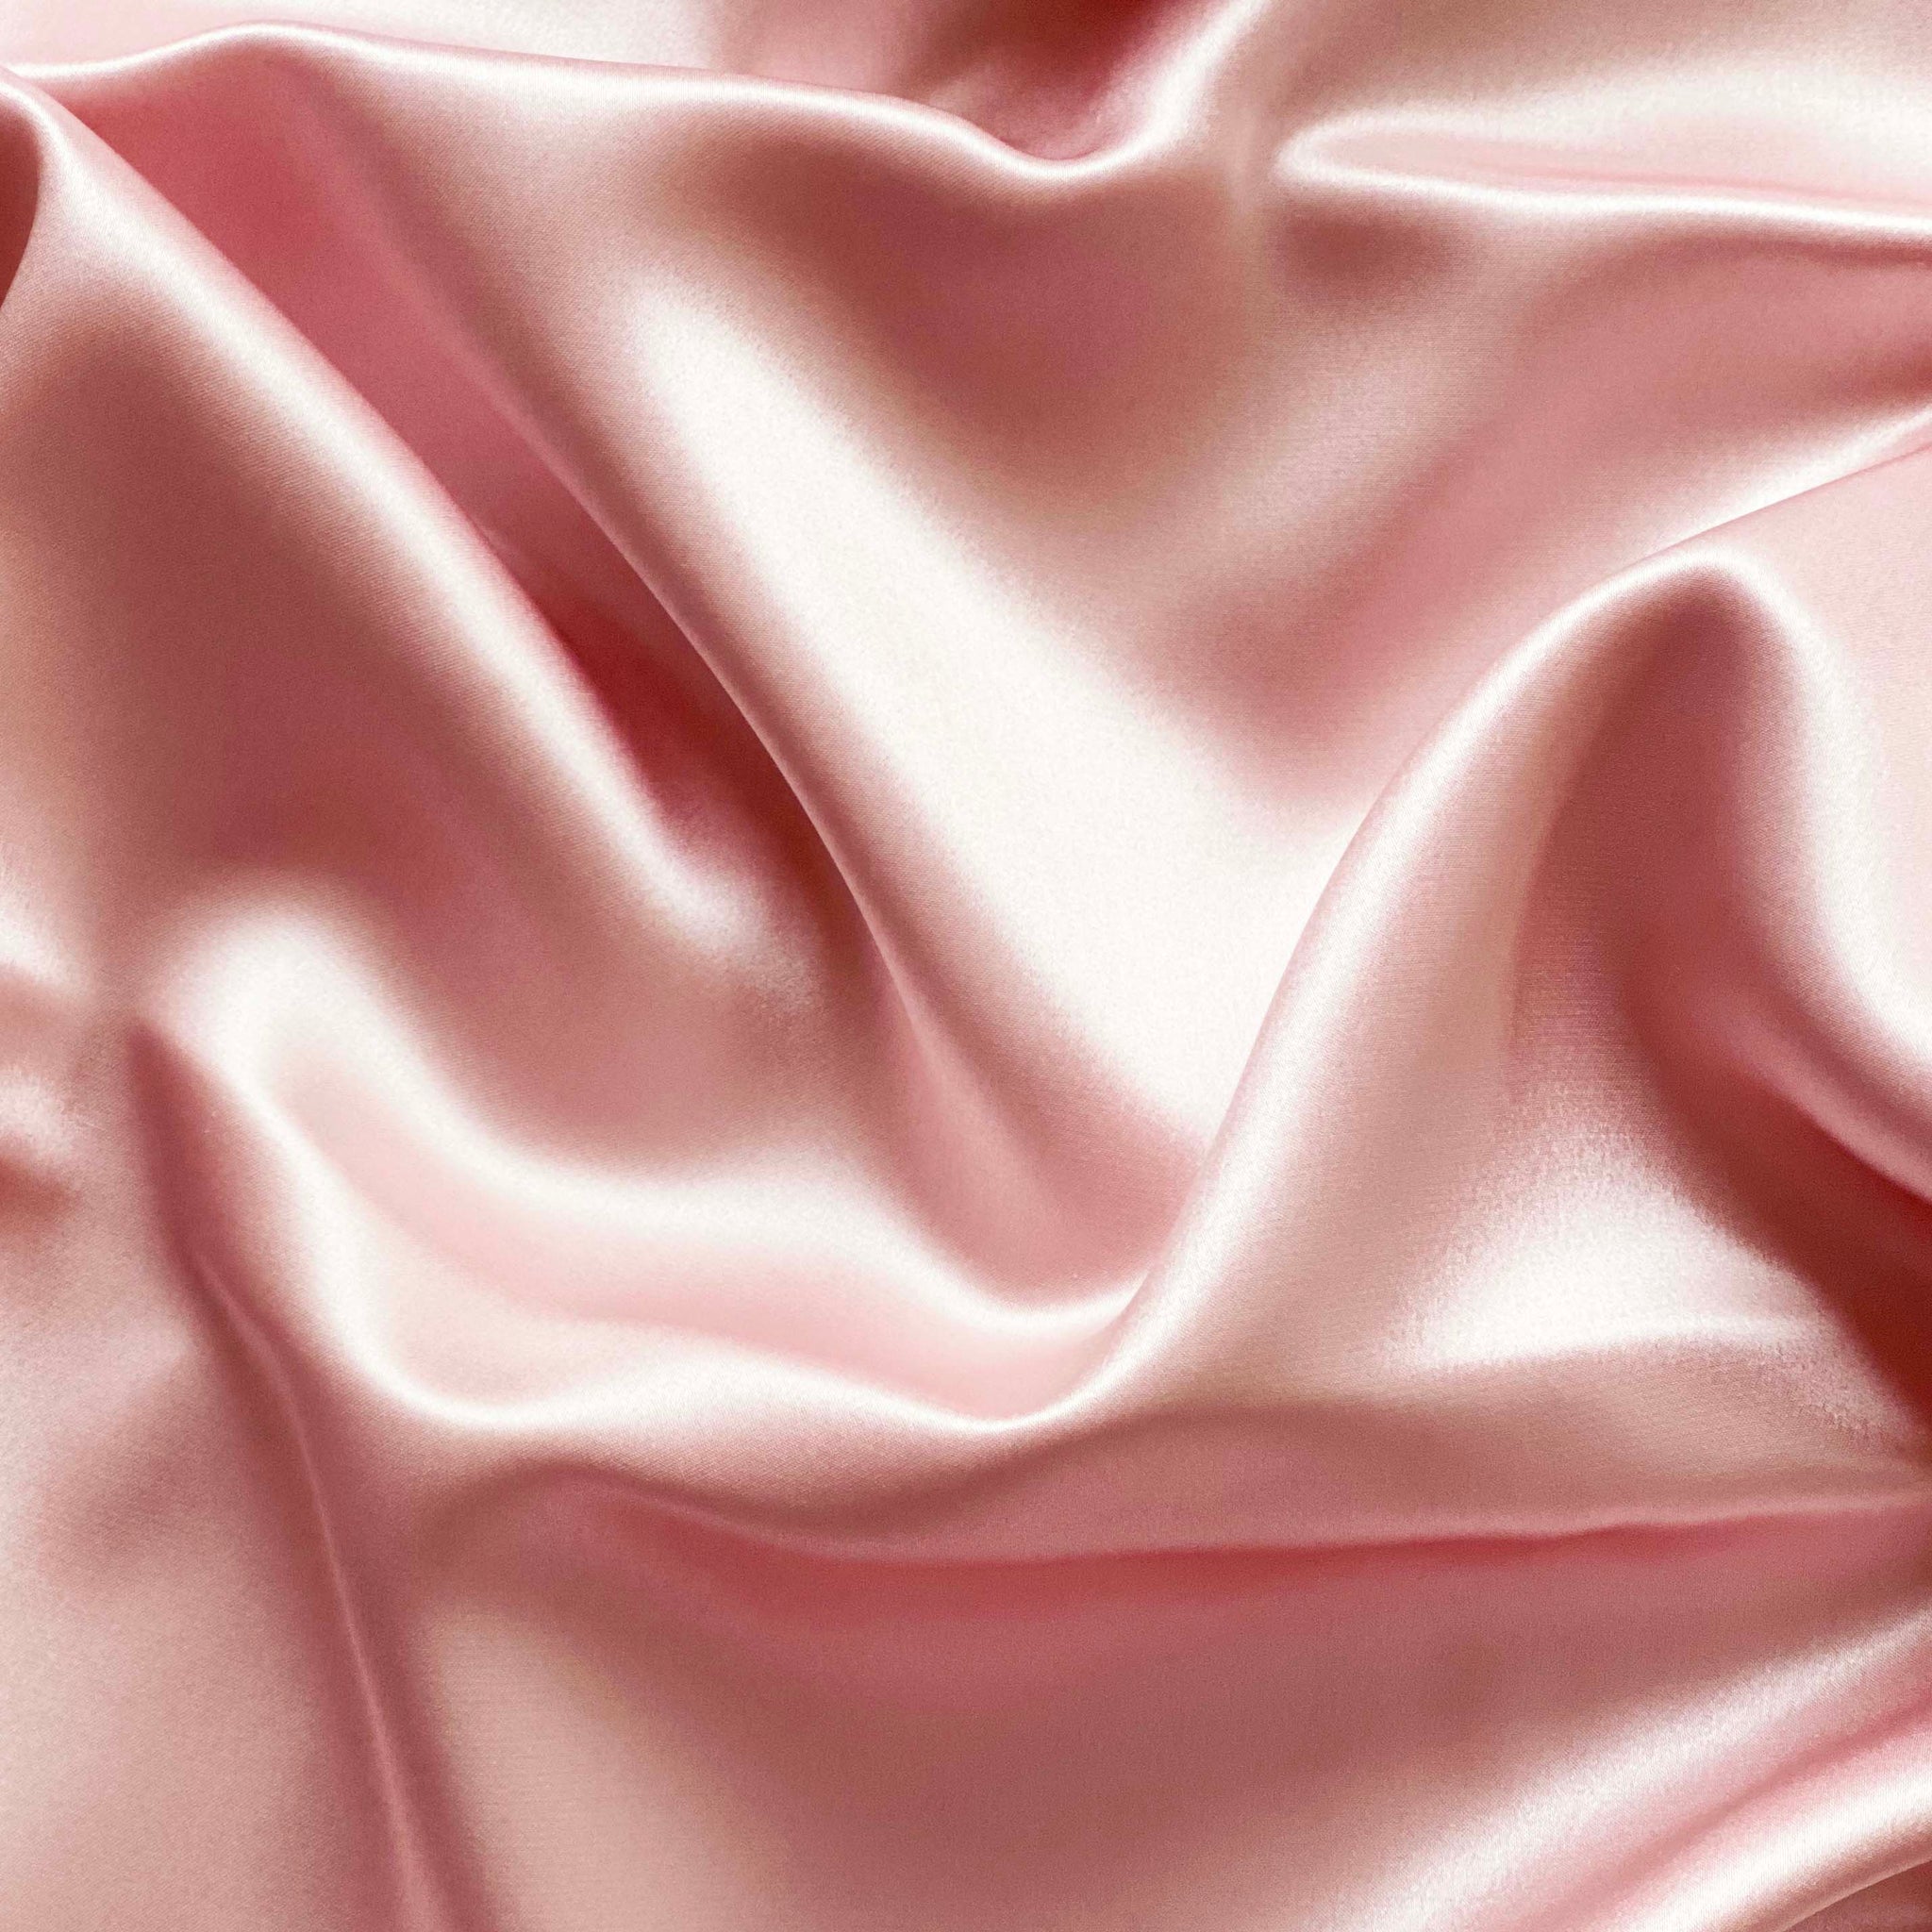 How to Identify Real Silk